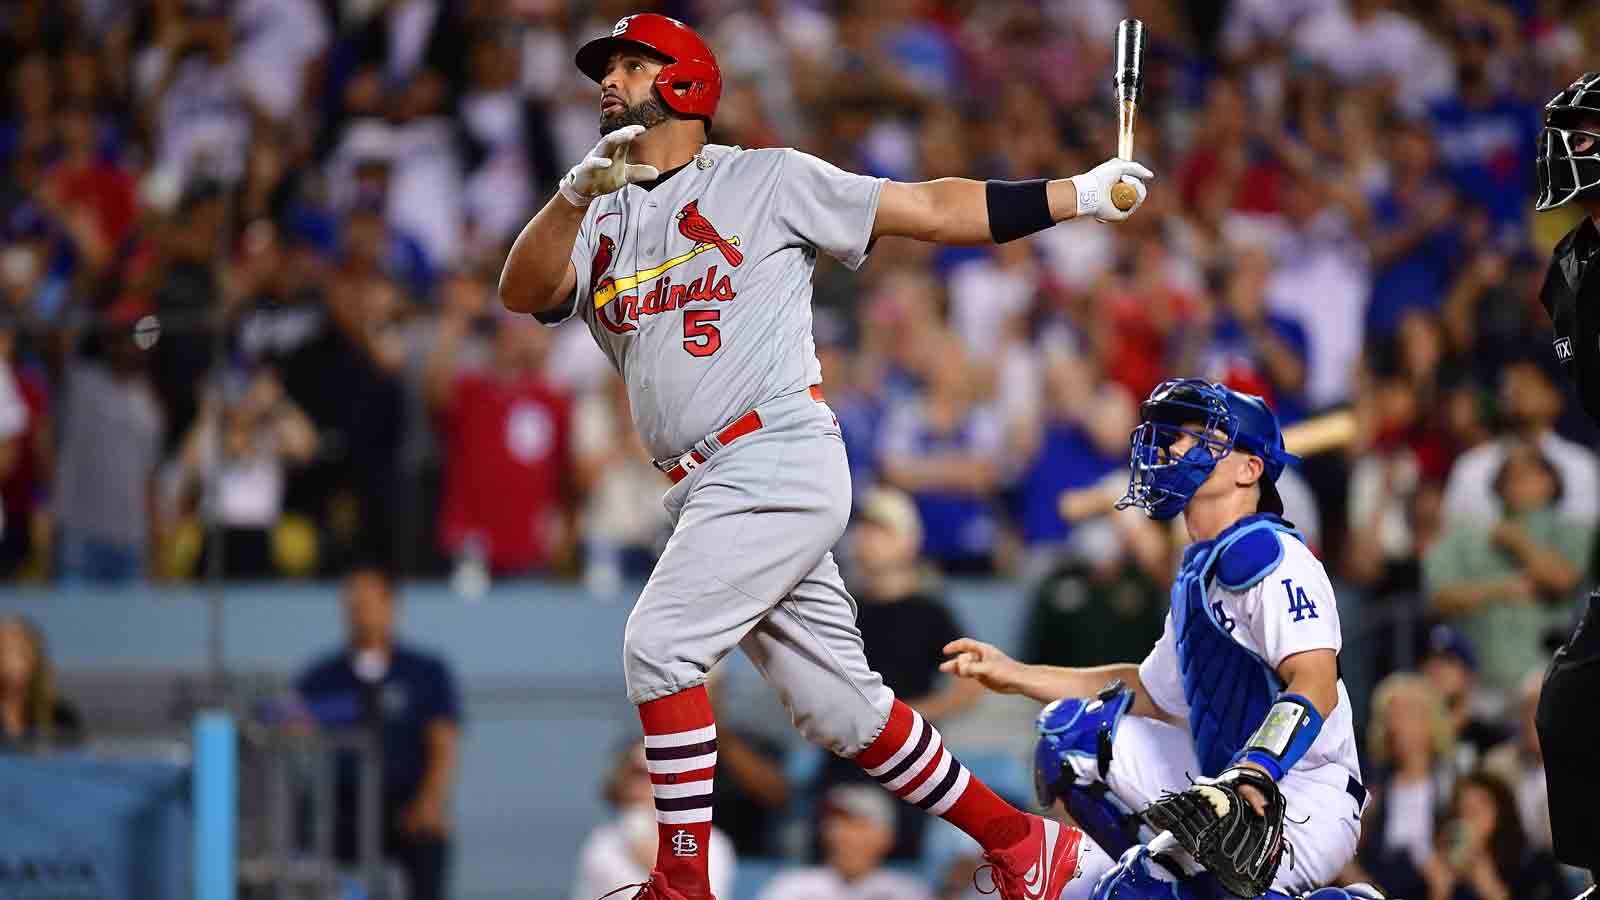 Pujols concludes STL return with 2 hits, Molina jersey swap